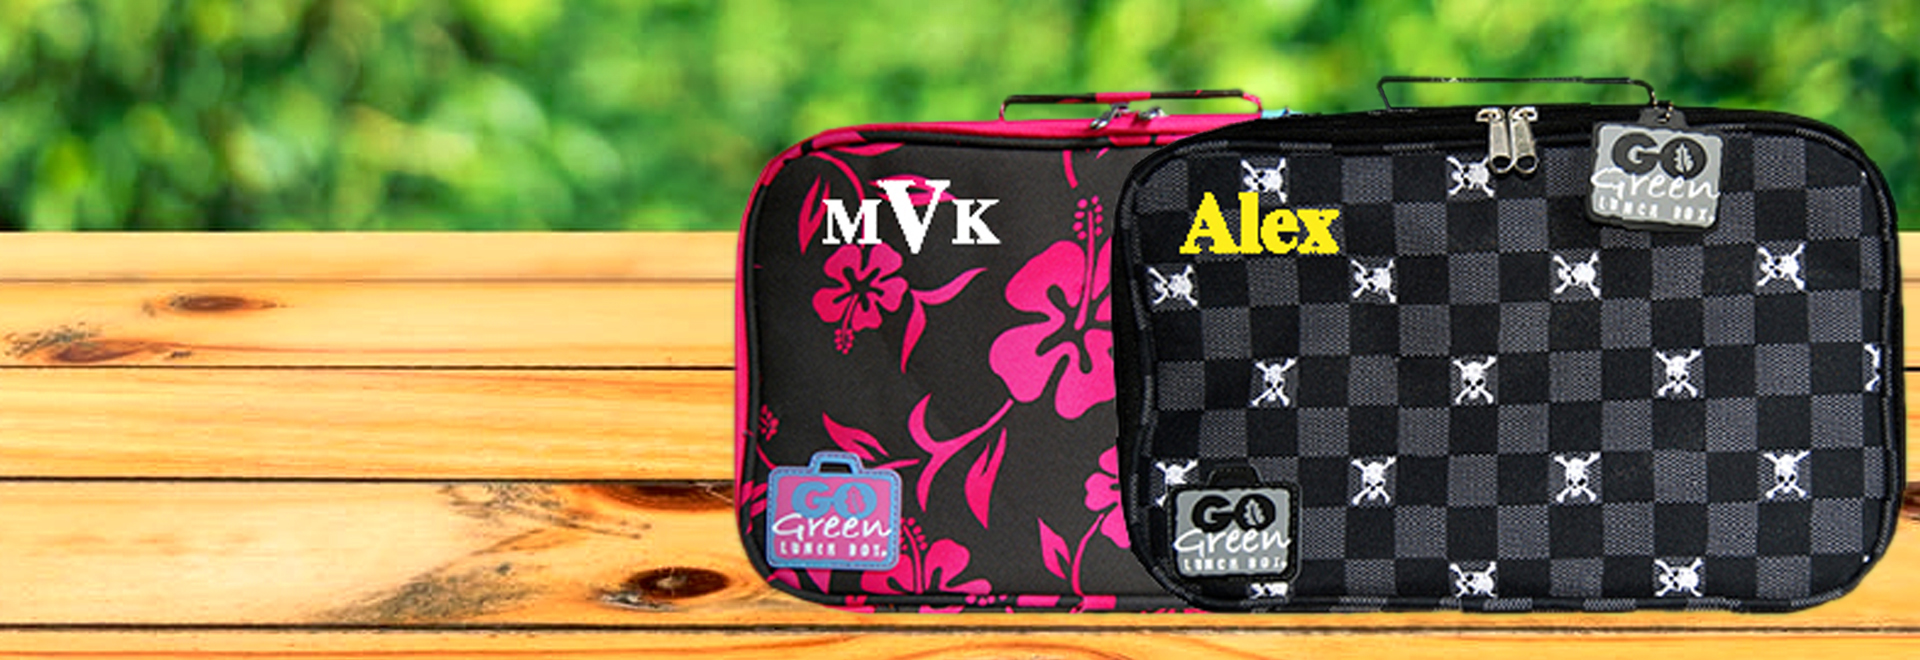 Go Green Lunch Box | Hawaiian Flowers Leakproof Insulated Lunch Box Set for  Boys Girls Kids | 5 Comp…See more Go Green Lunch Box | Hawaiian Flowers